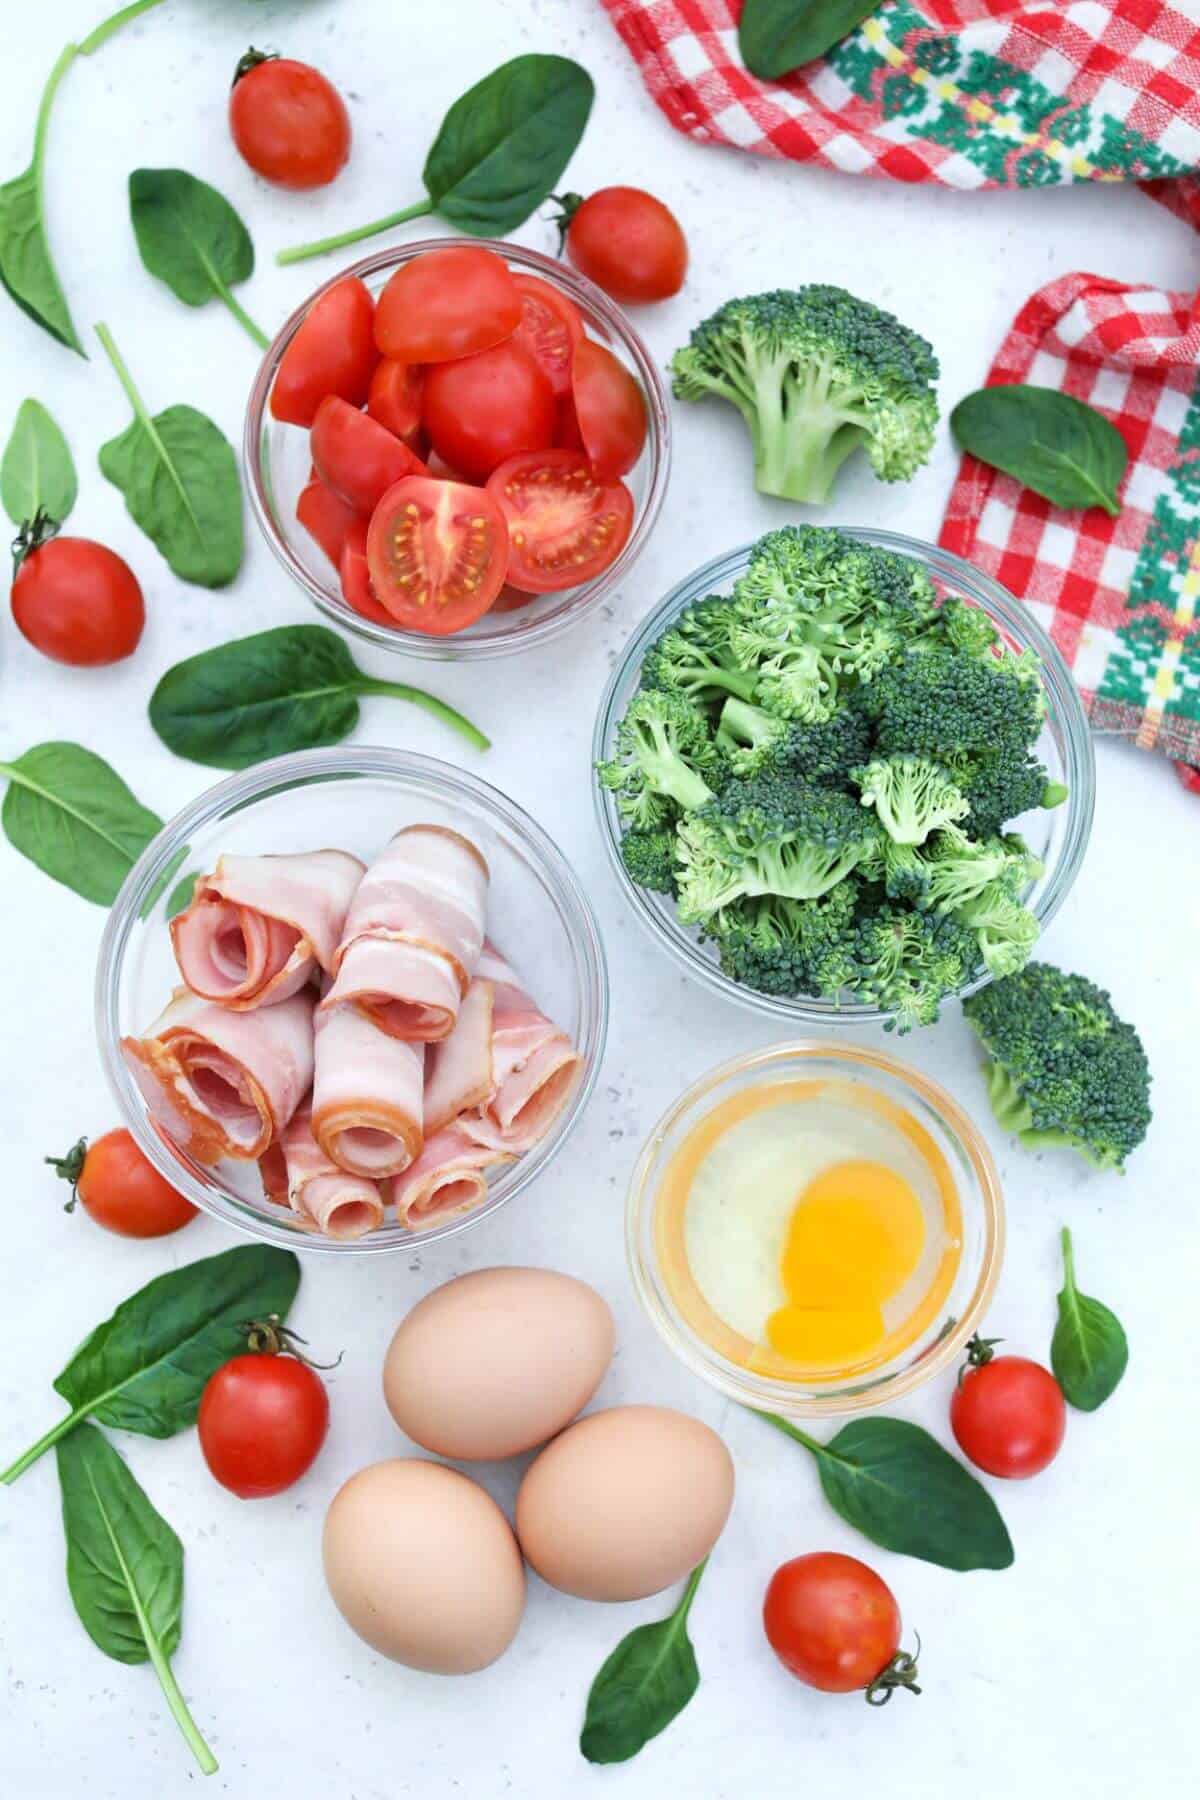 Sheet pan eggs and bacon recipe ingredients.